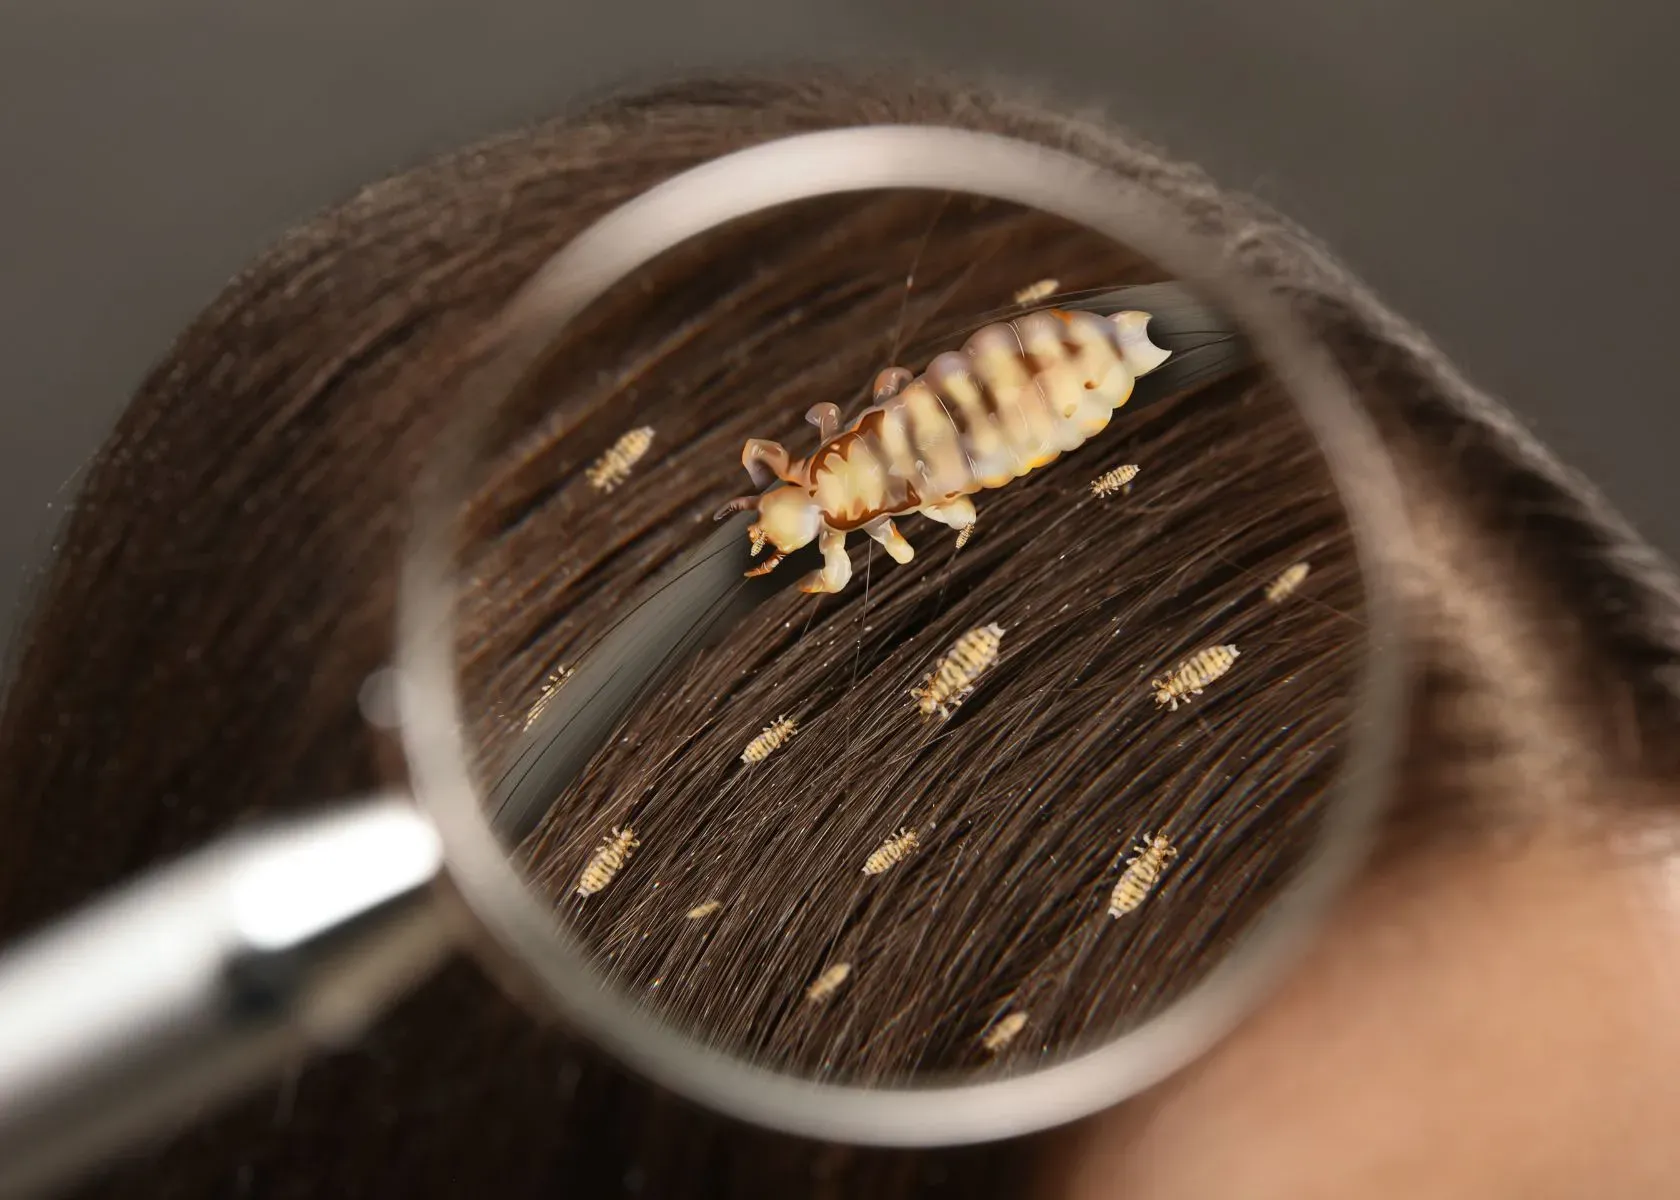 What Are Head Lice and Nits?